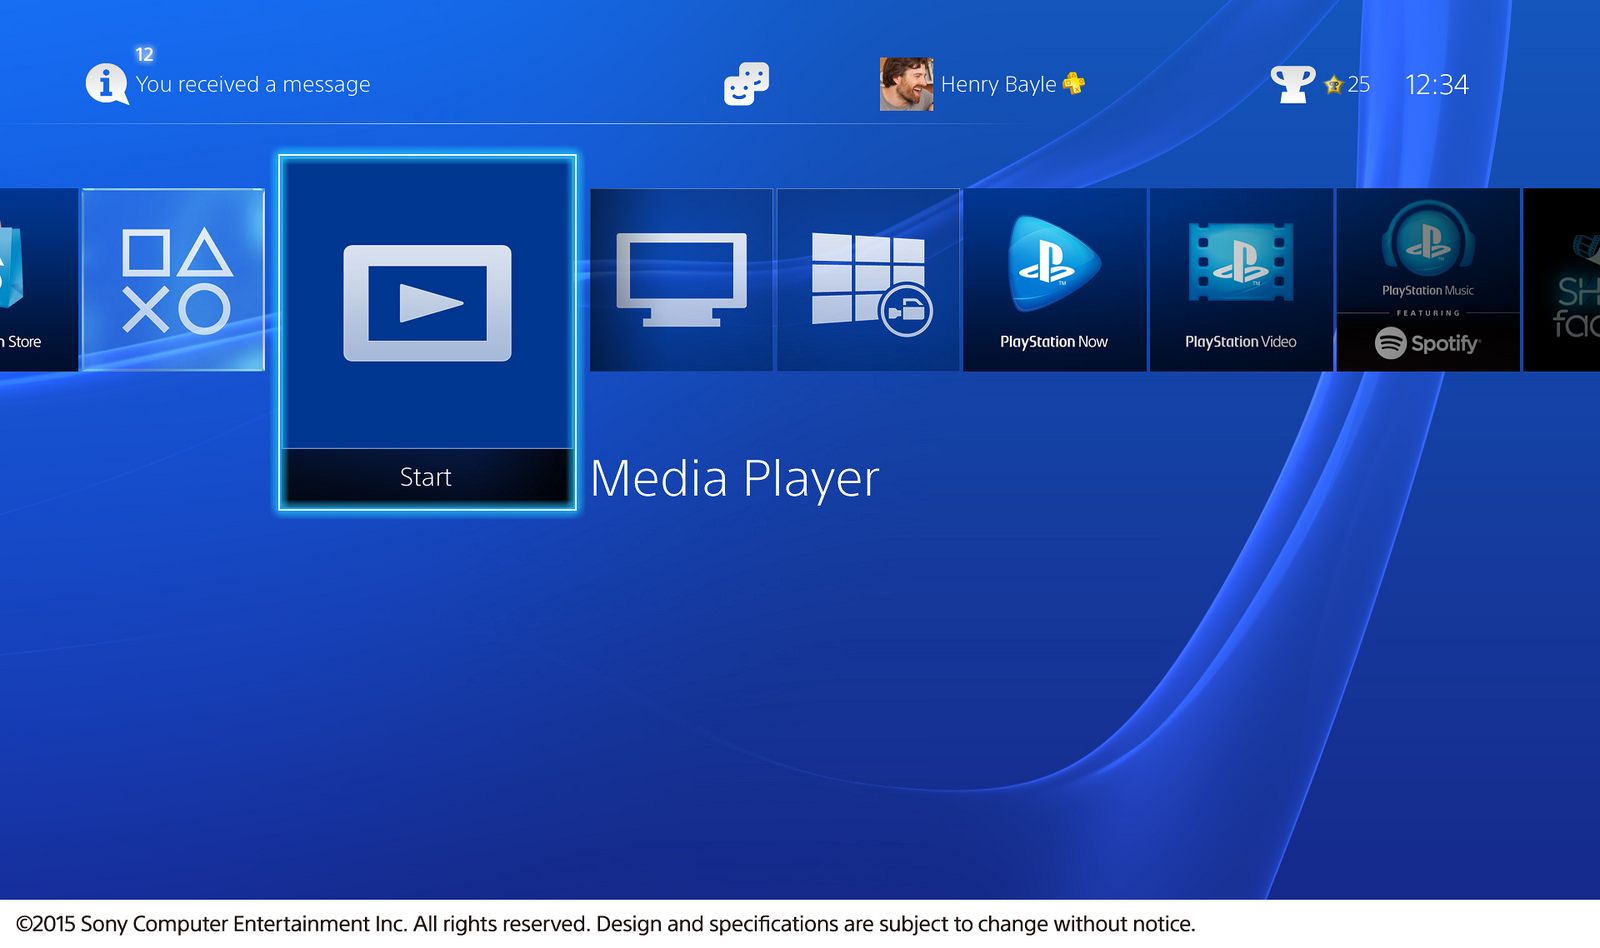 ps4 media player brings torrents to playstation image 1